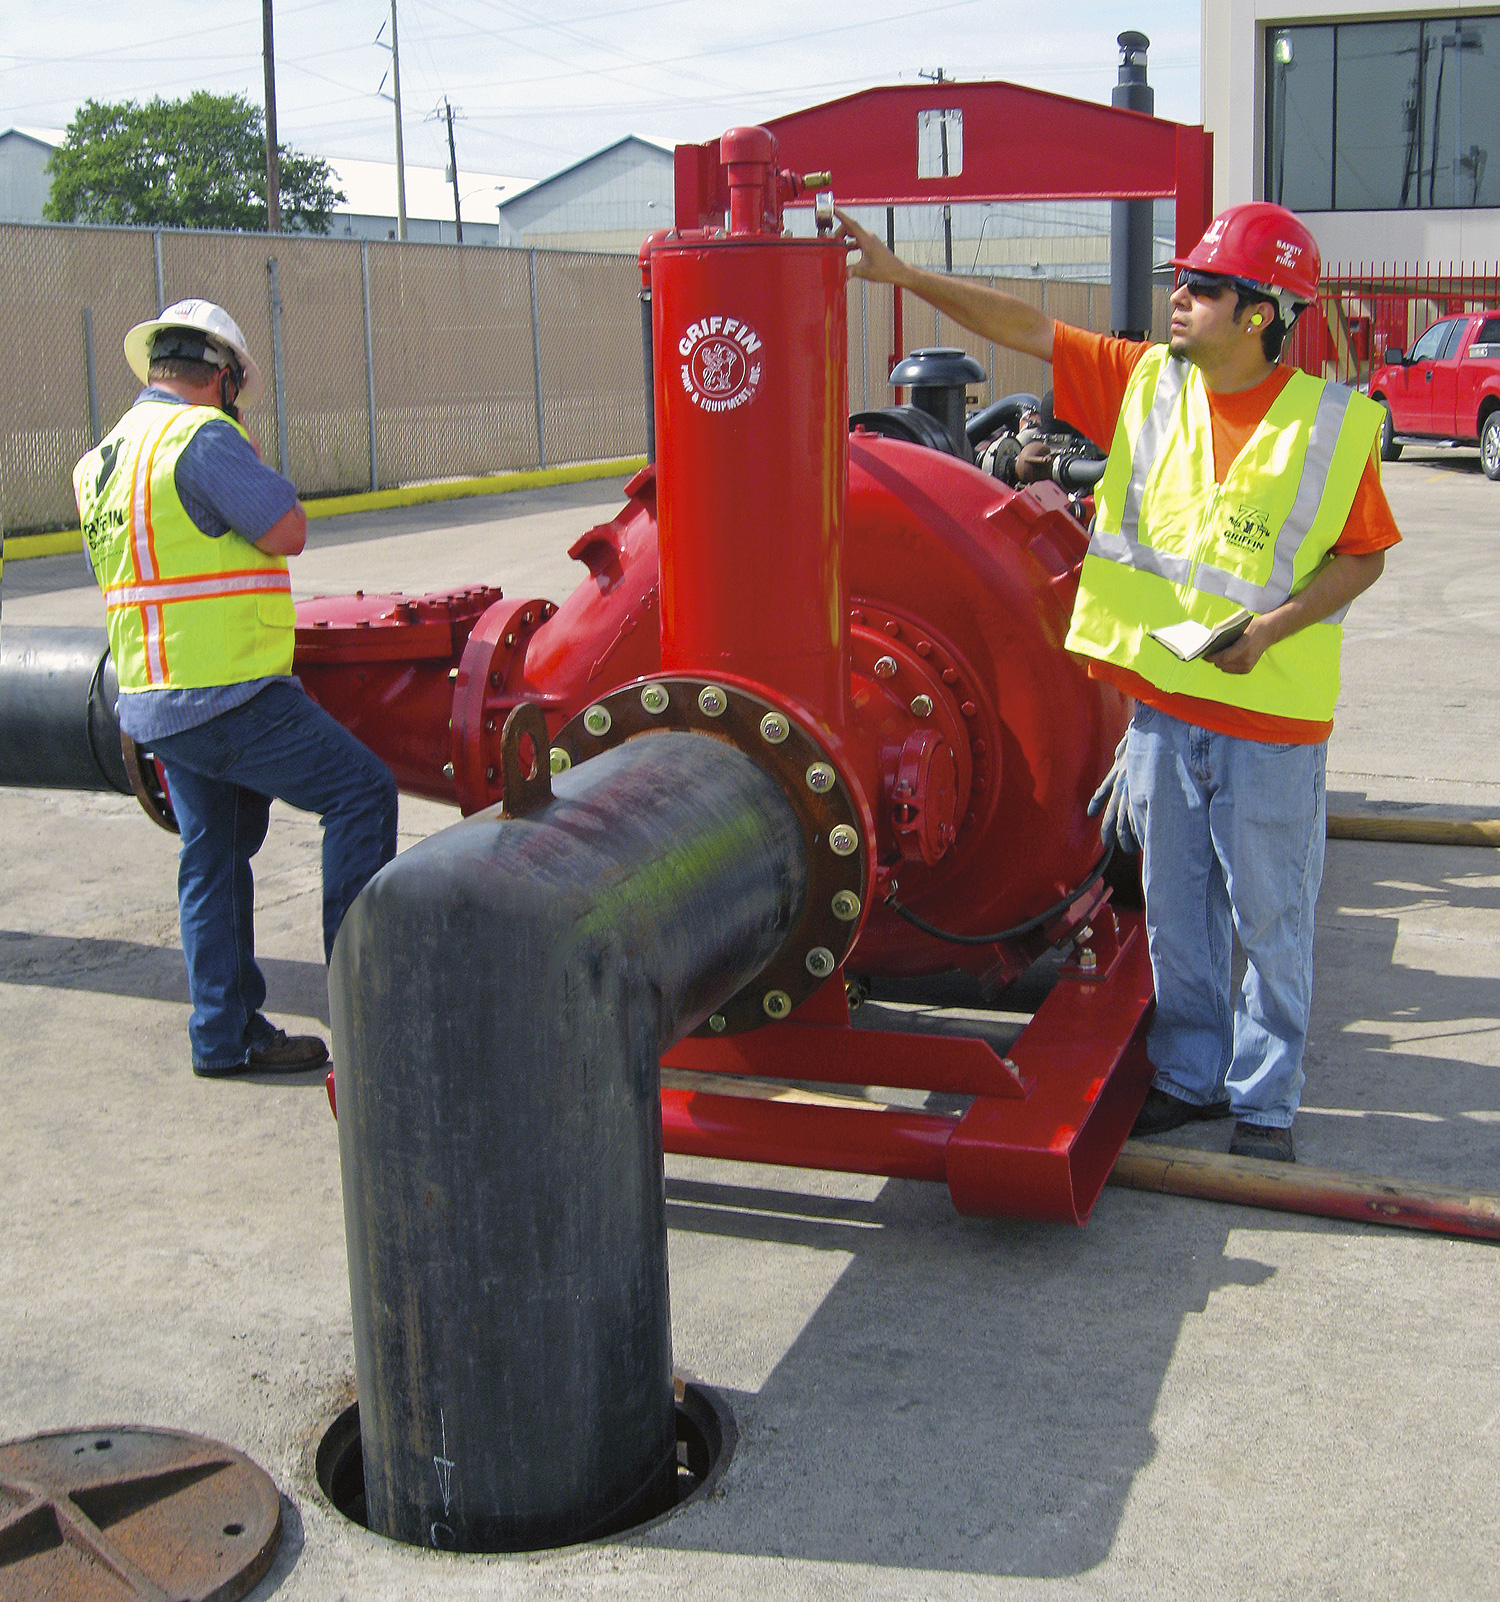 Sewer bypass pumping system with non-clog impeller